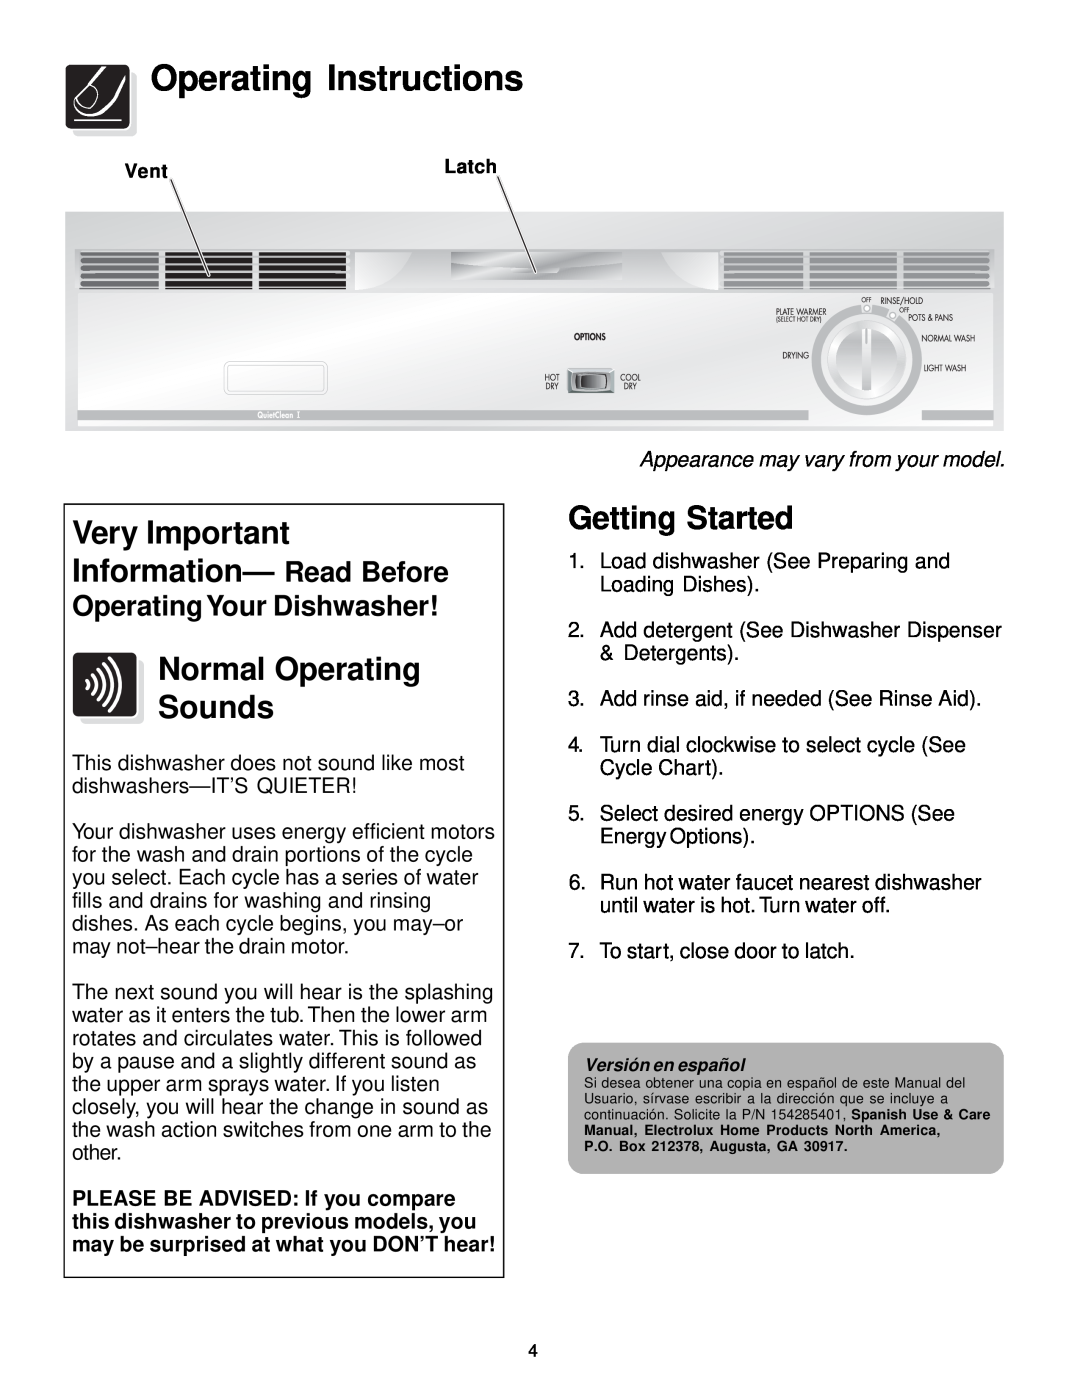 Frigidaire 400 Series warranty Operating Instructions, Very Important Information- Read Before, Normal Operating Sounds 